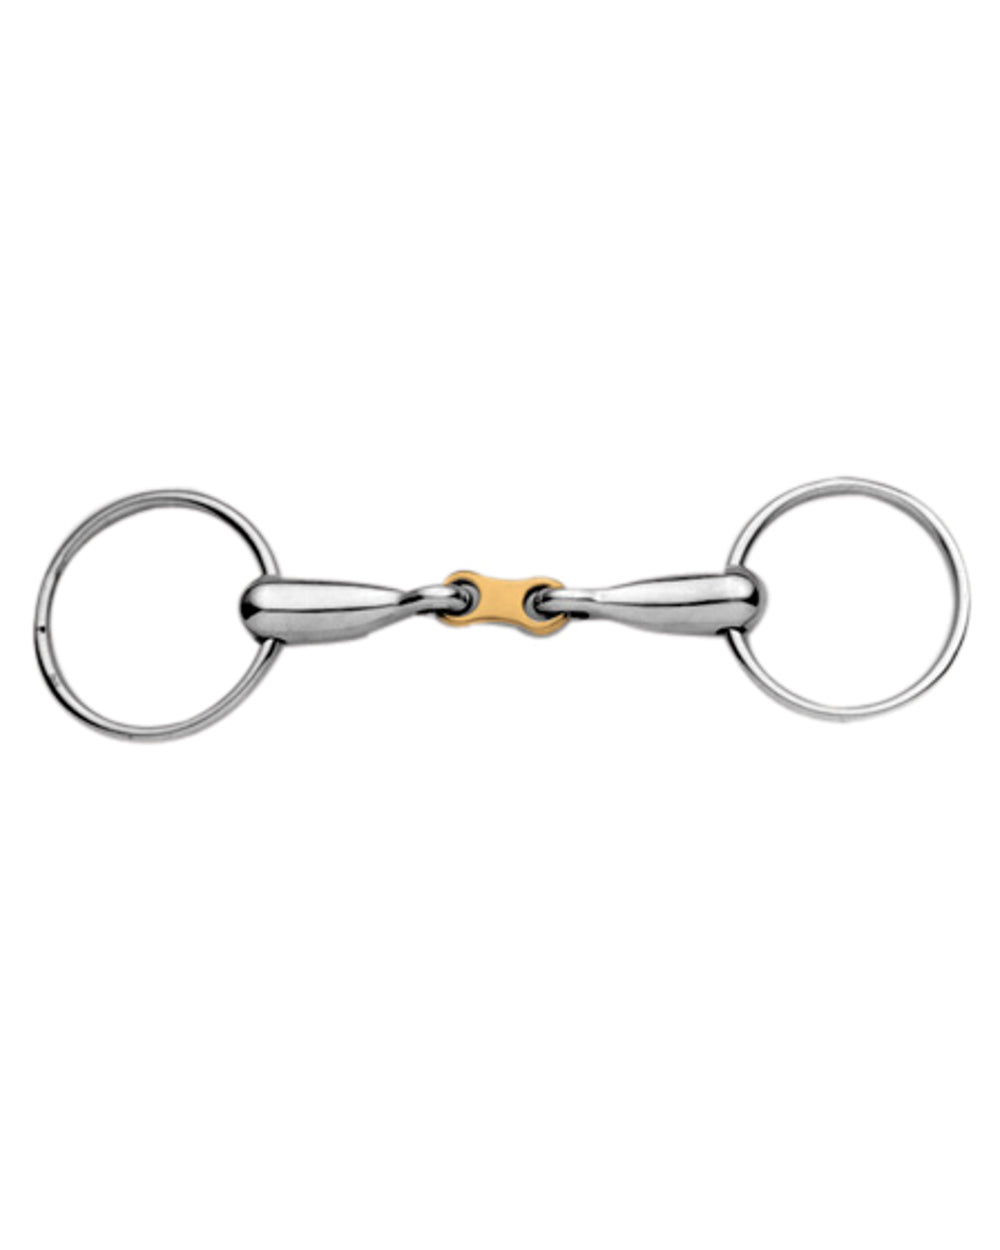 Korsteel Stainless Steel With Copper French Link Loose Ring Snaffle Bit on white background 